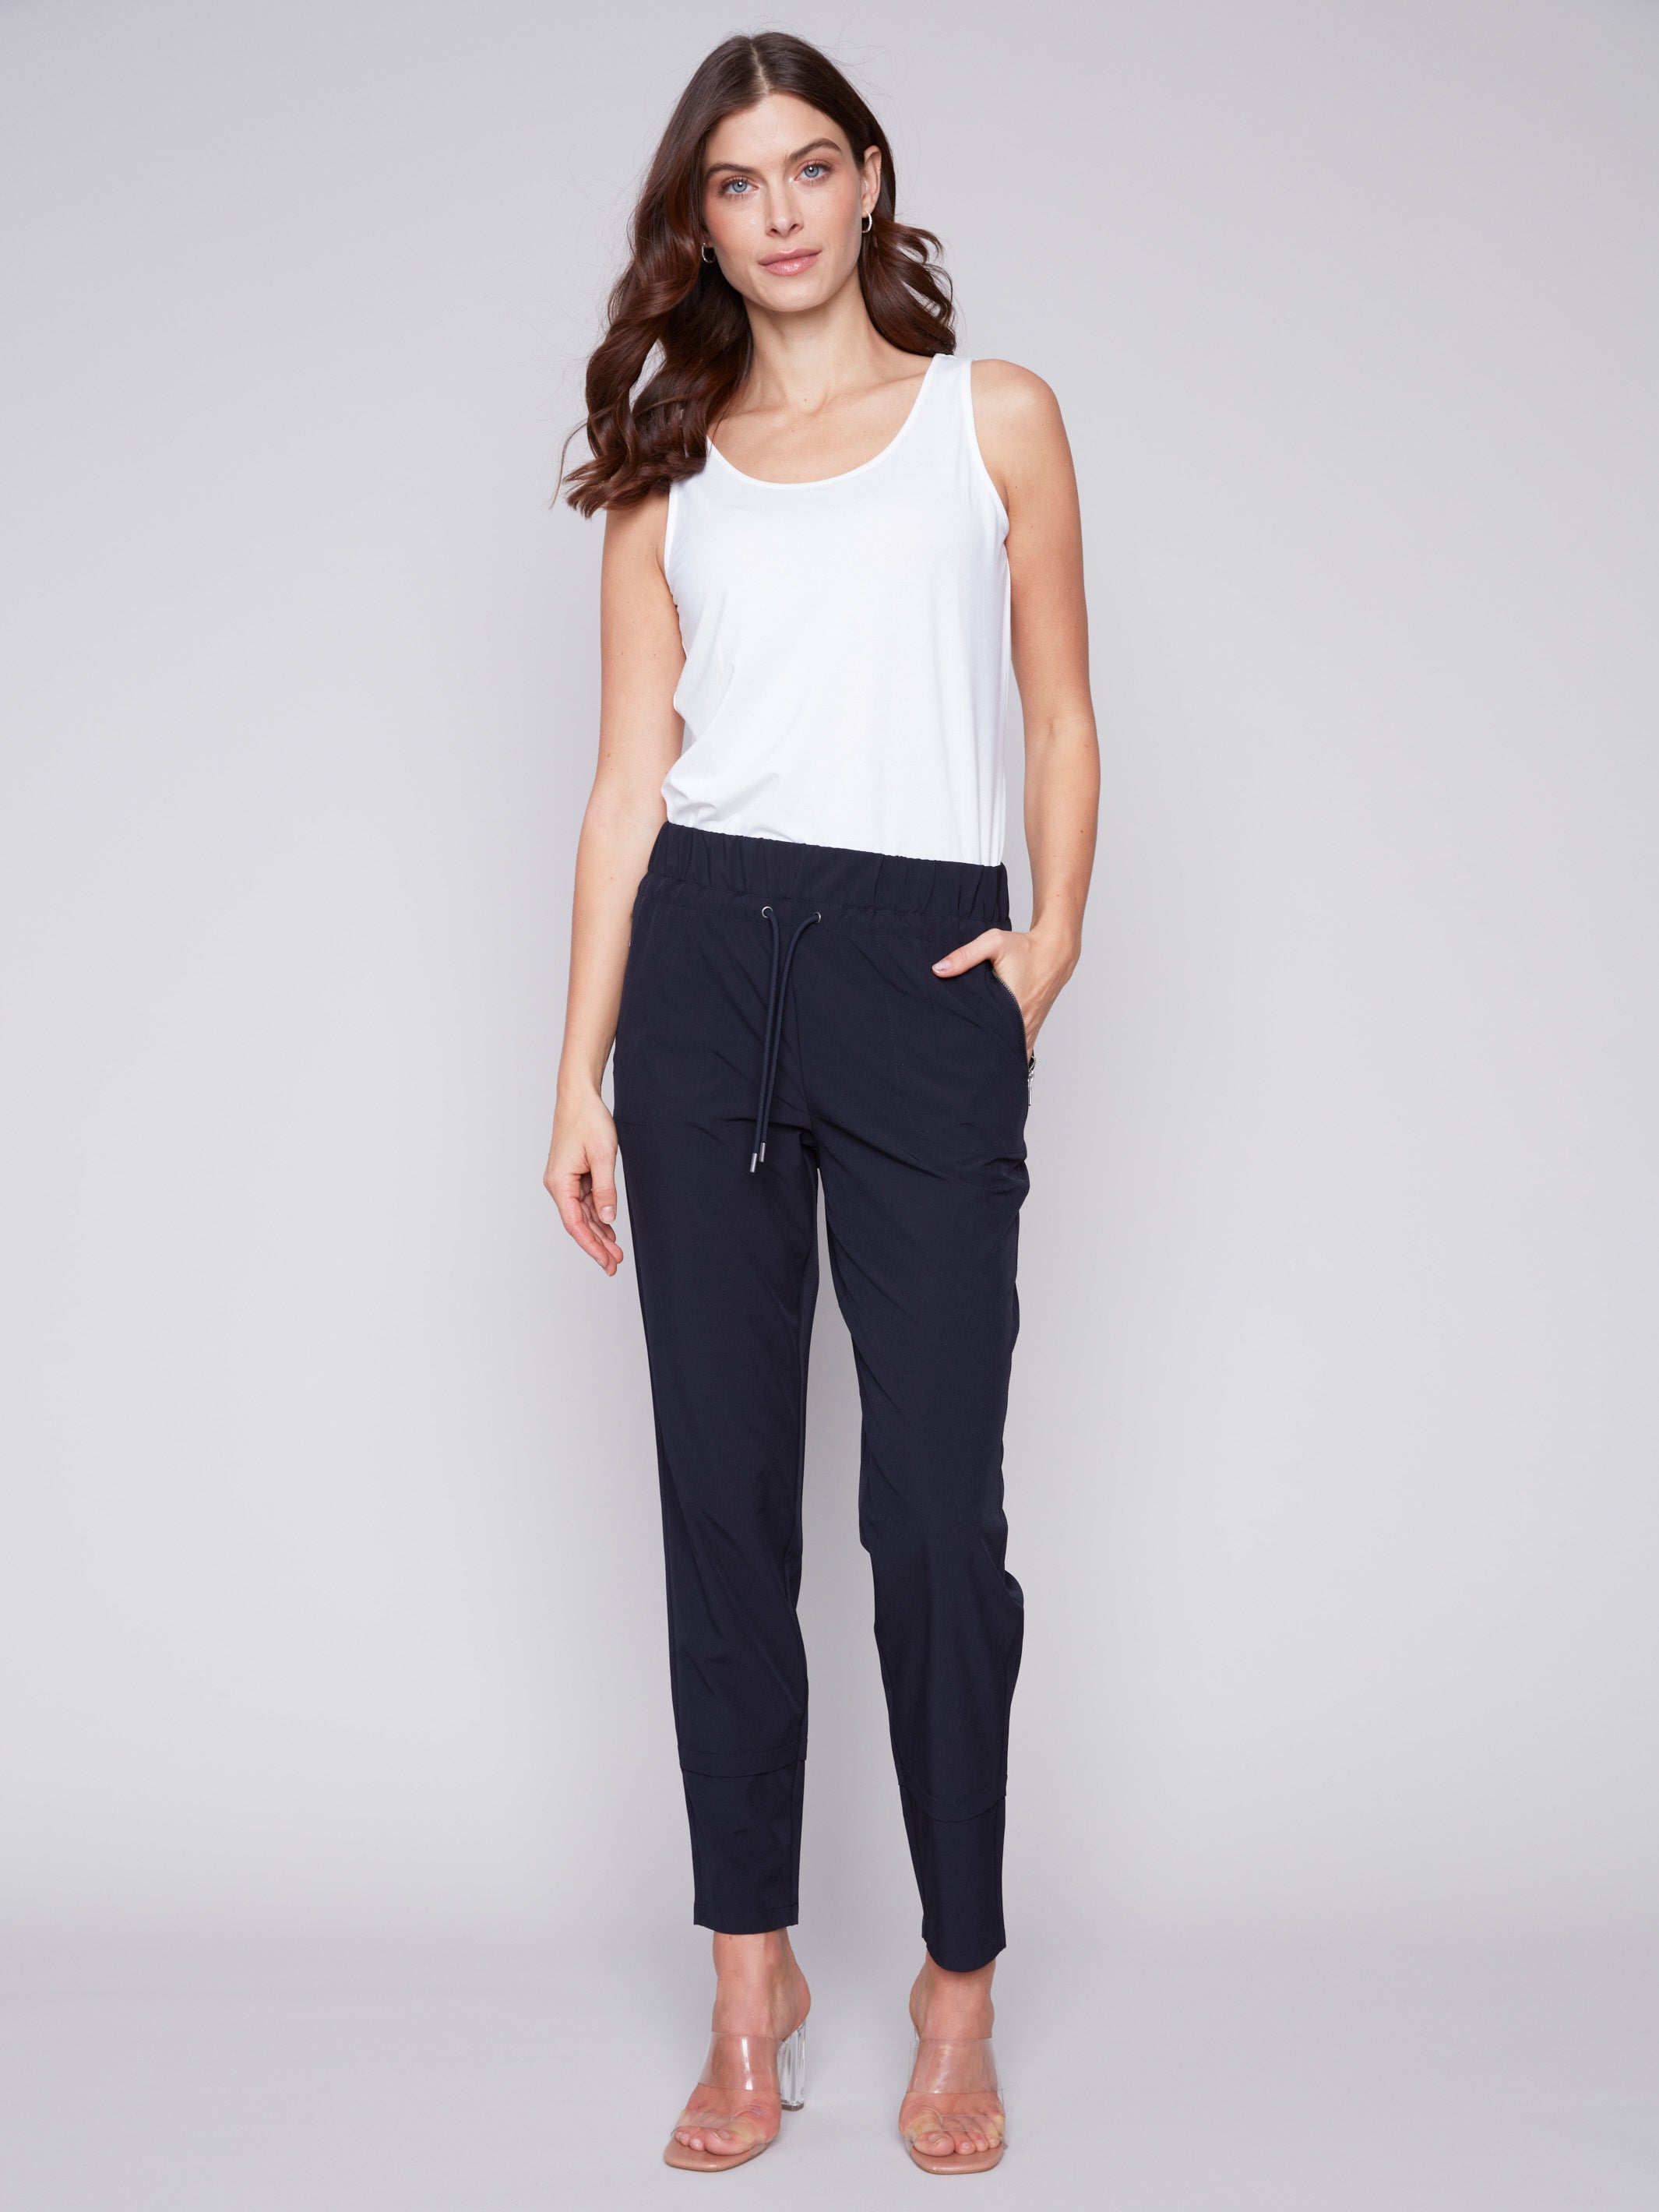 Techno Pants - Navy - Charlie B Collection Canada - Image 1